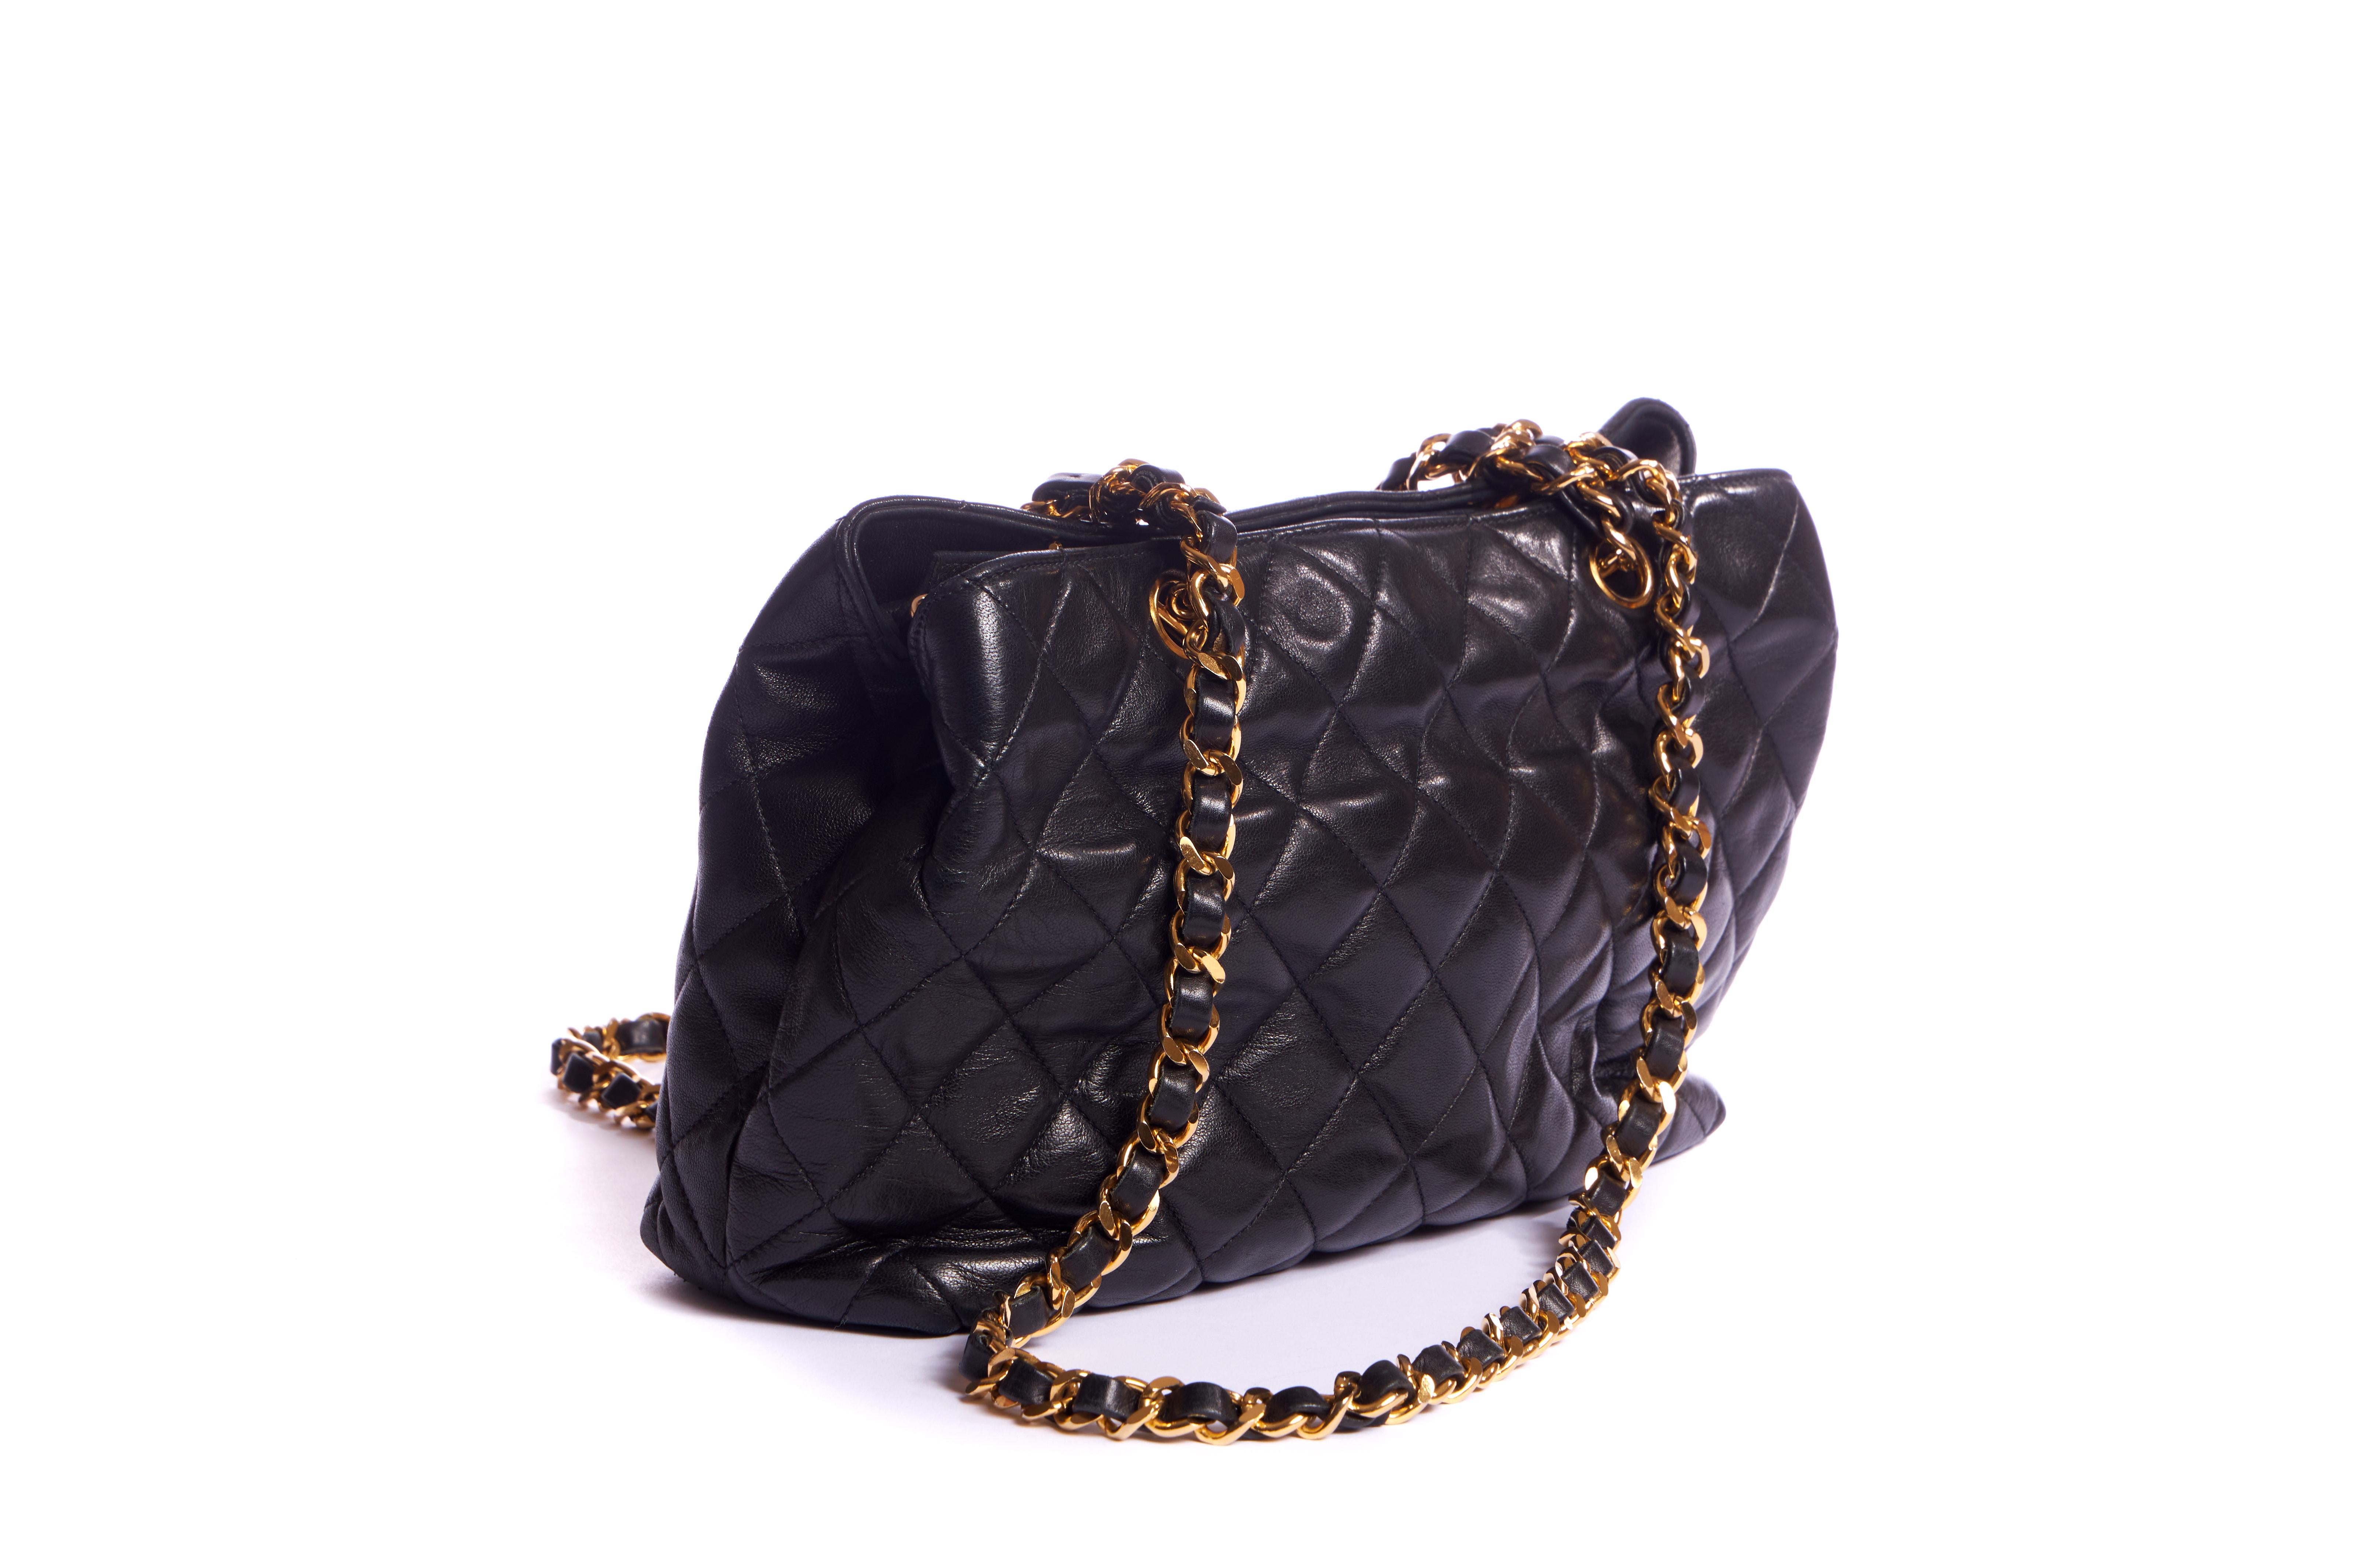 Chanel classic quilted zipped handbag with heavy duty gold chains. Shoulder drop 10.5